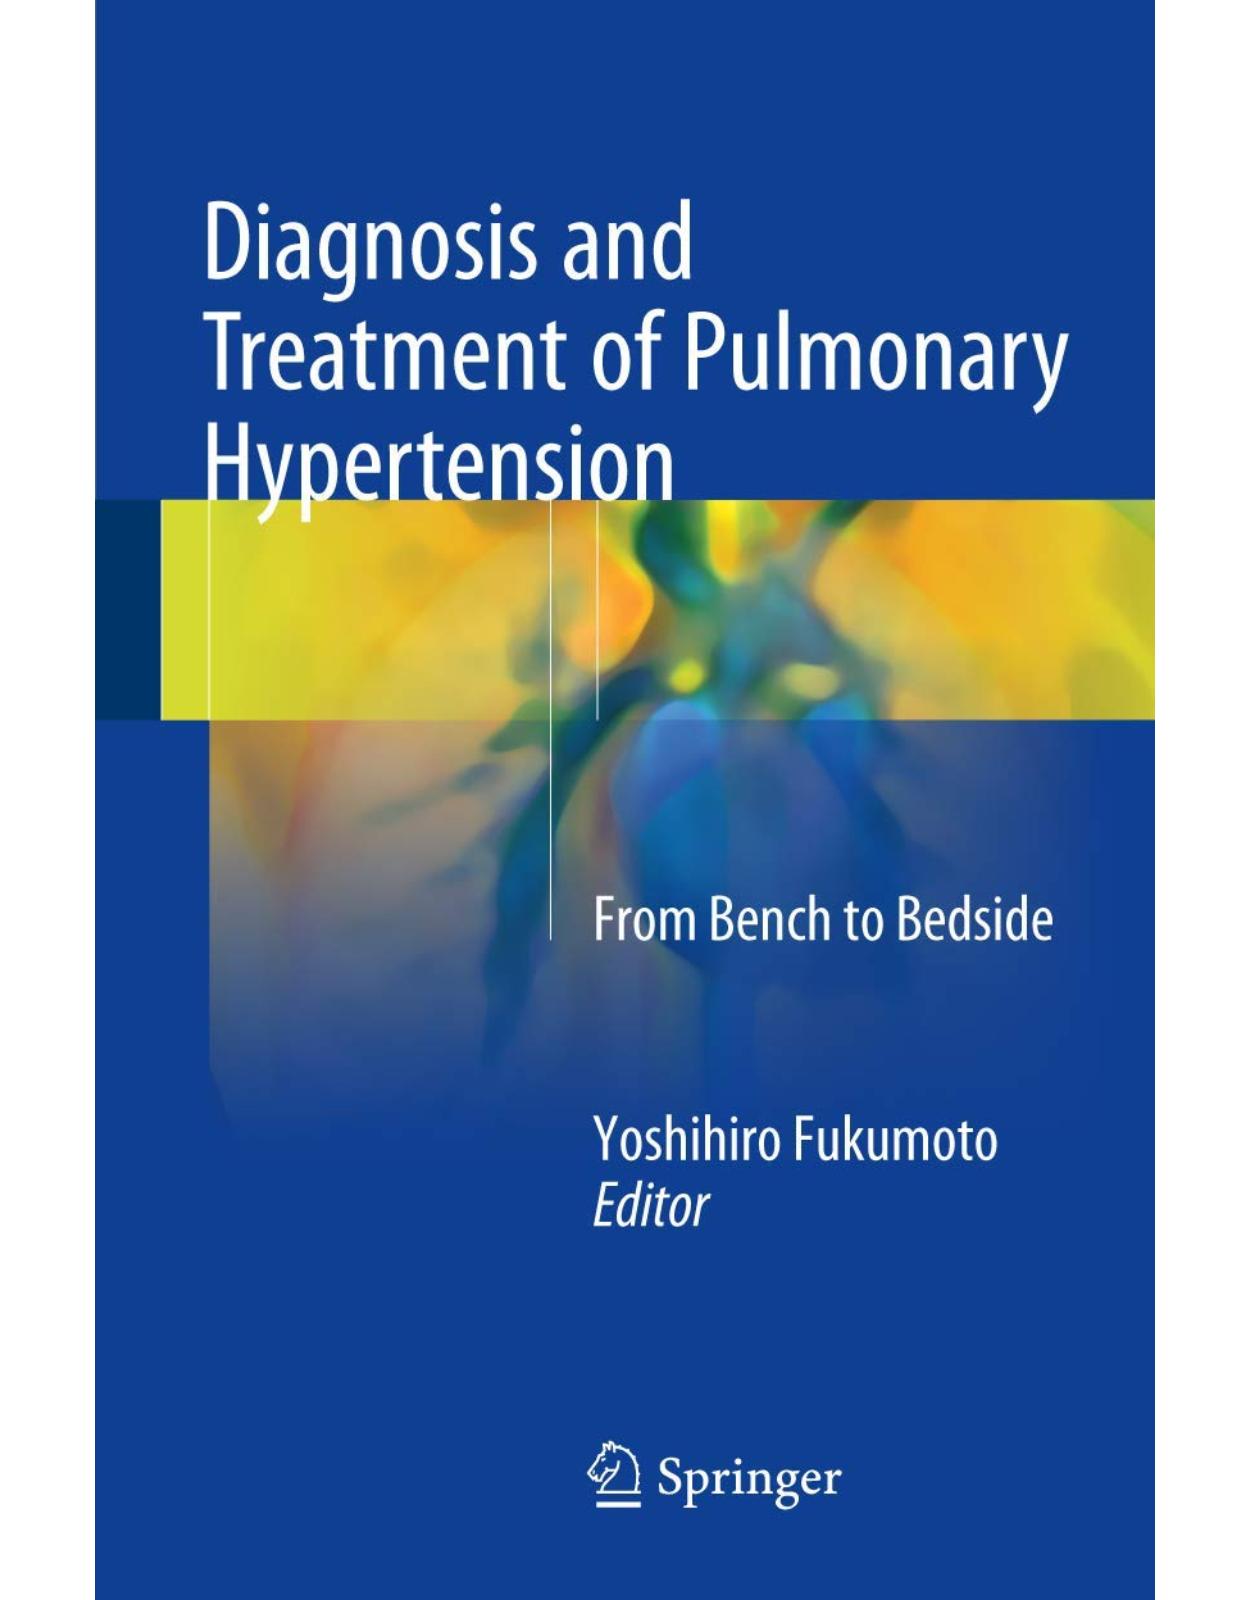 Diagnosis and Treatment of Pulmonary Hypertension: From Bench to Bedside